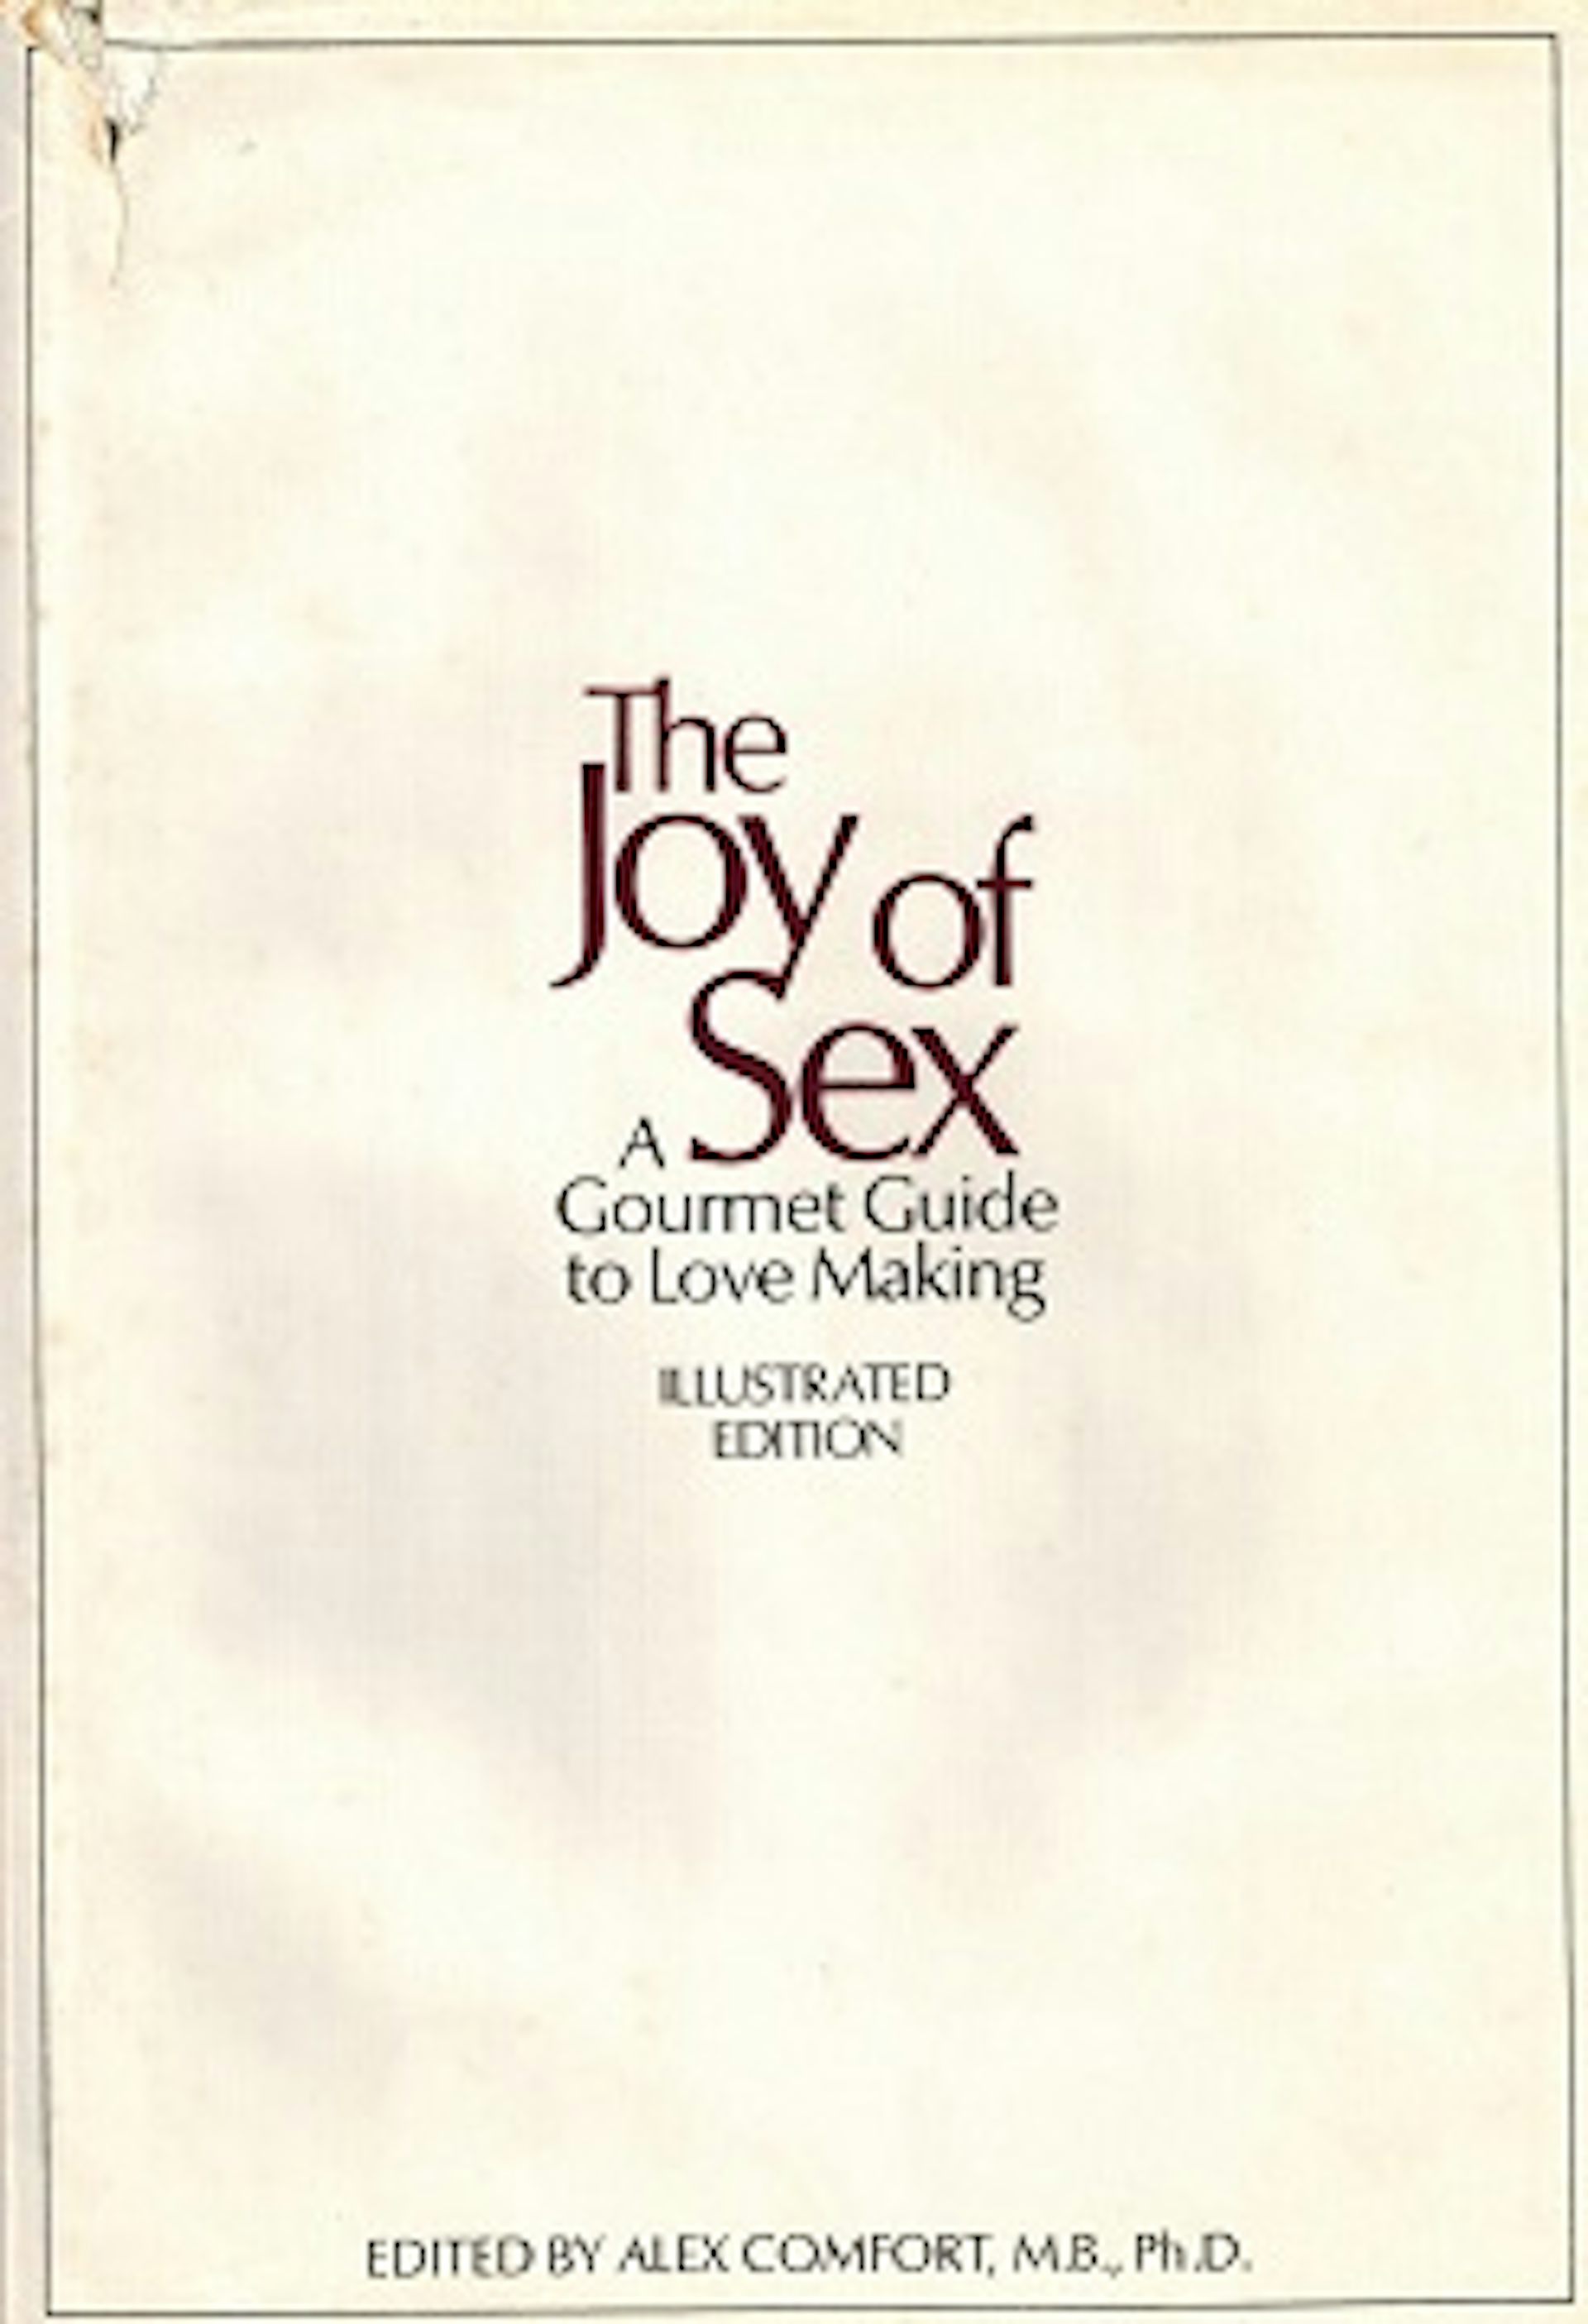 the joy of sex book pictures